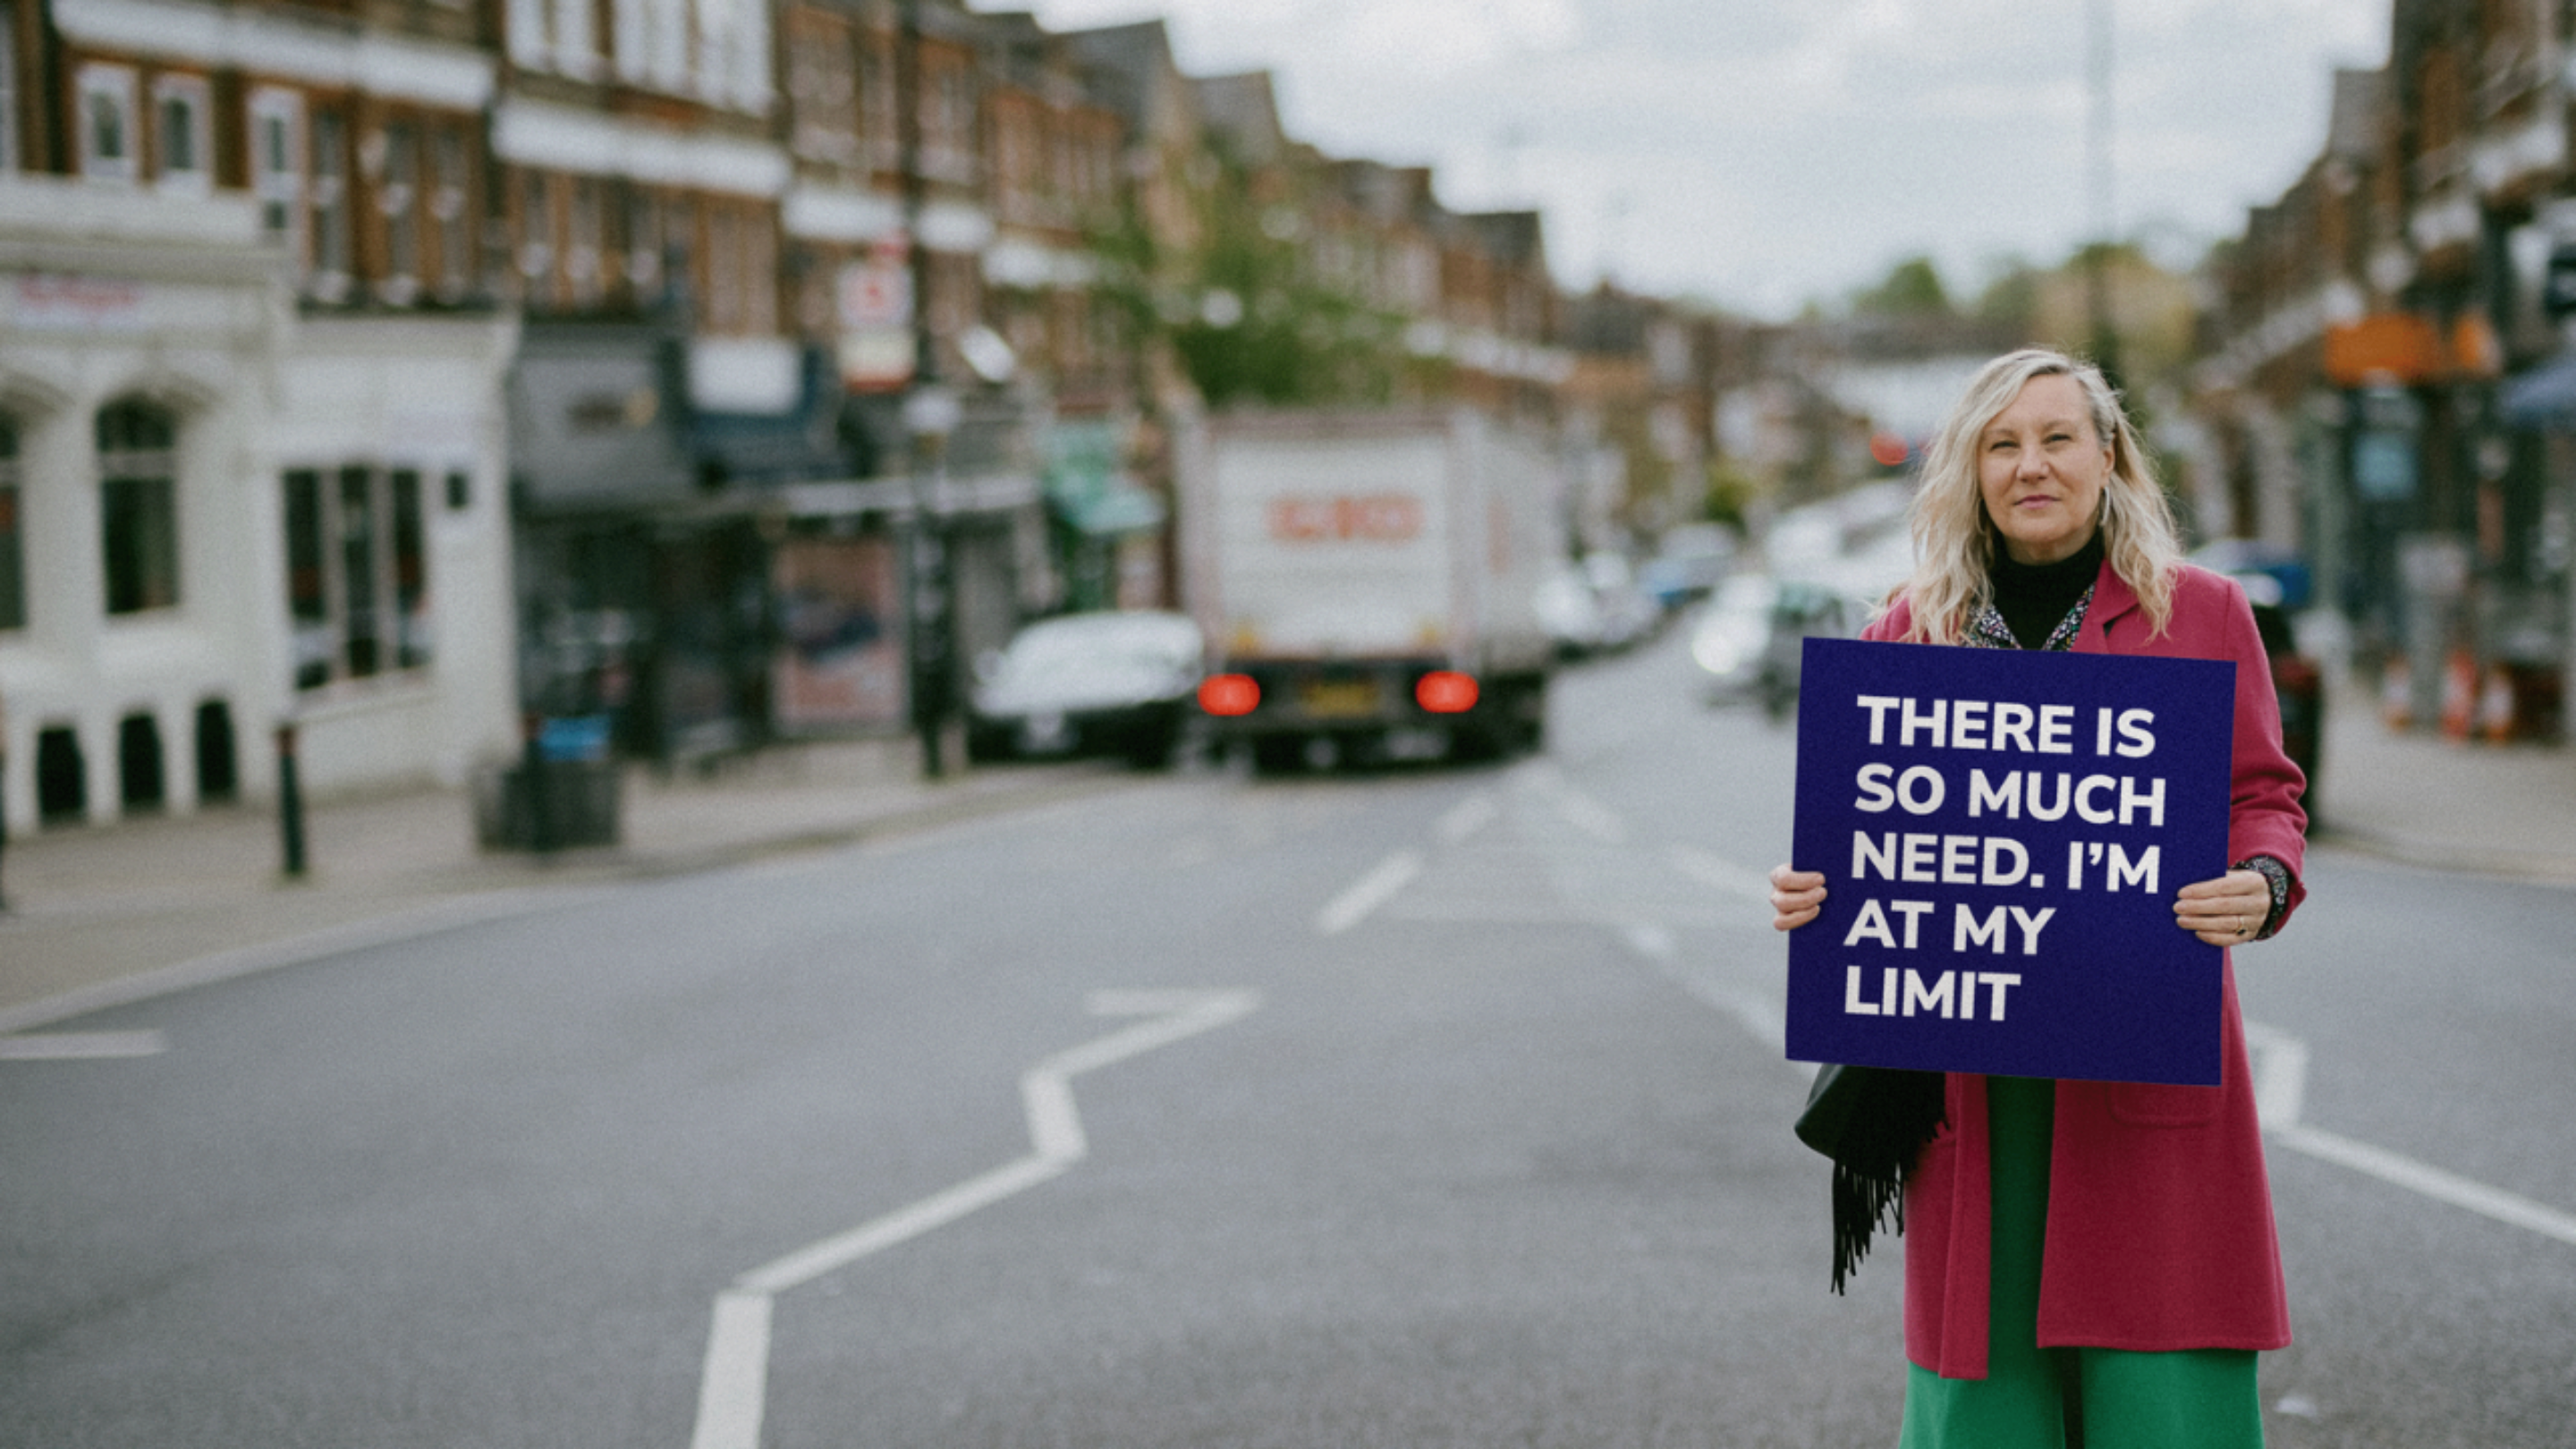 Ruth, co-Manager of her local CAP debt centre at Grace Church Brockley. She is standing on the street, wearing bold colours and holding a sign that reads 'There is so much need. I'm at my limit'